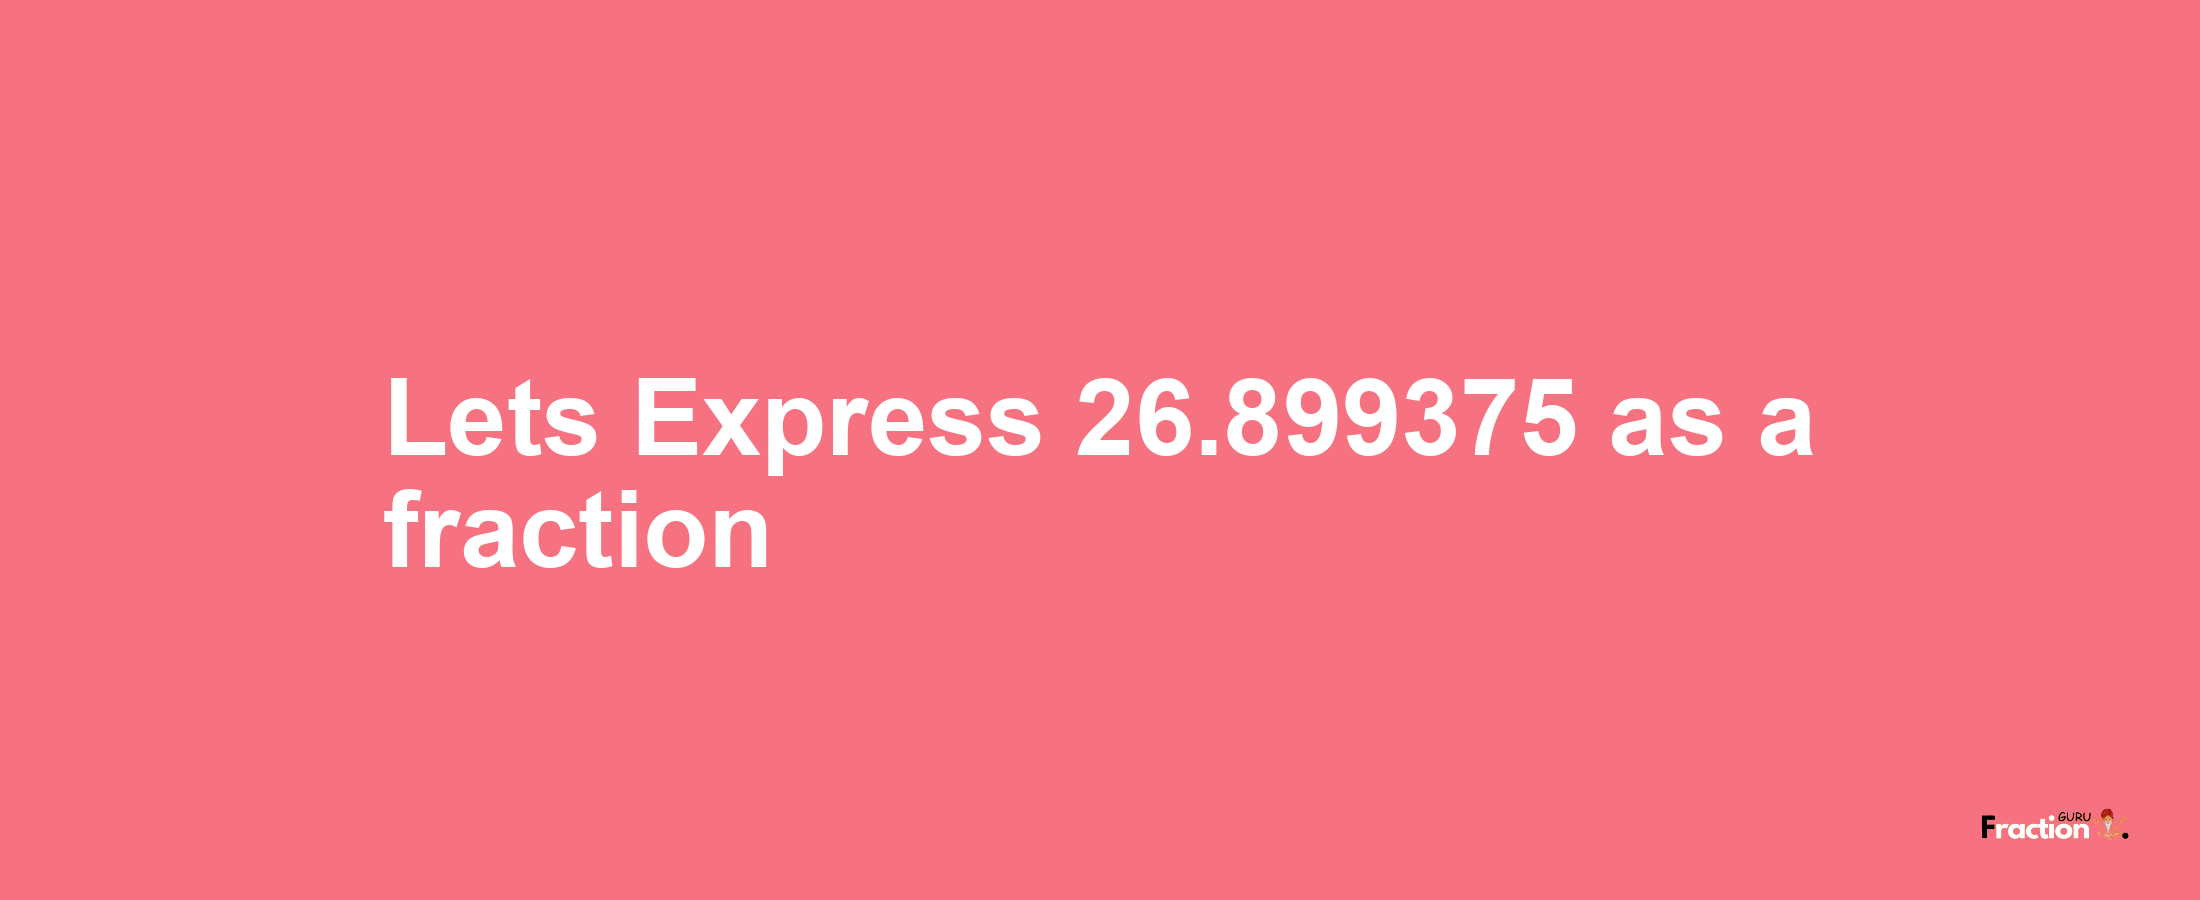 Lets Express 26.899375 as afraction